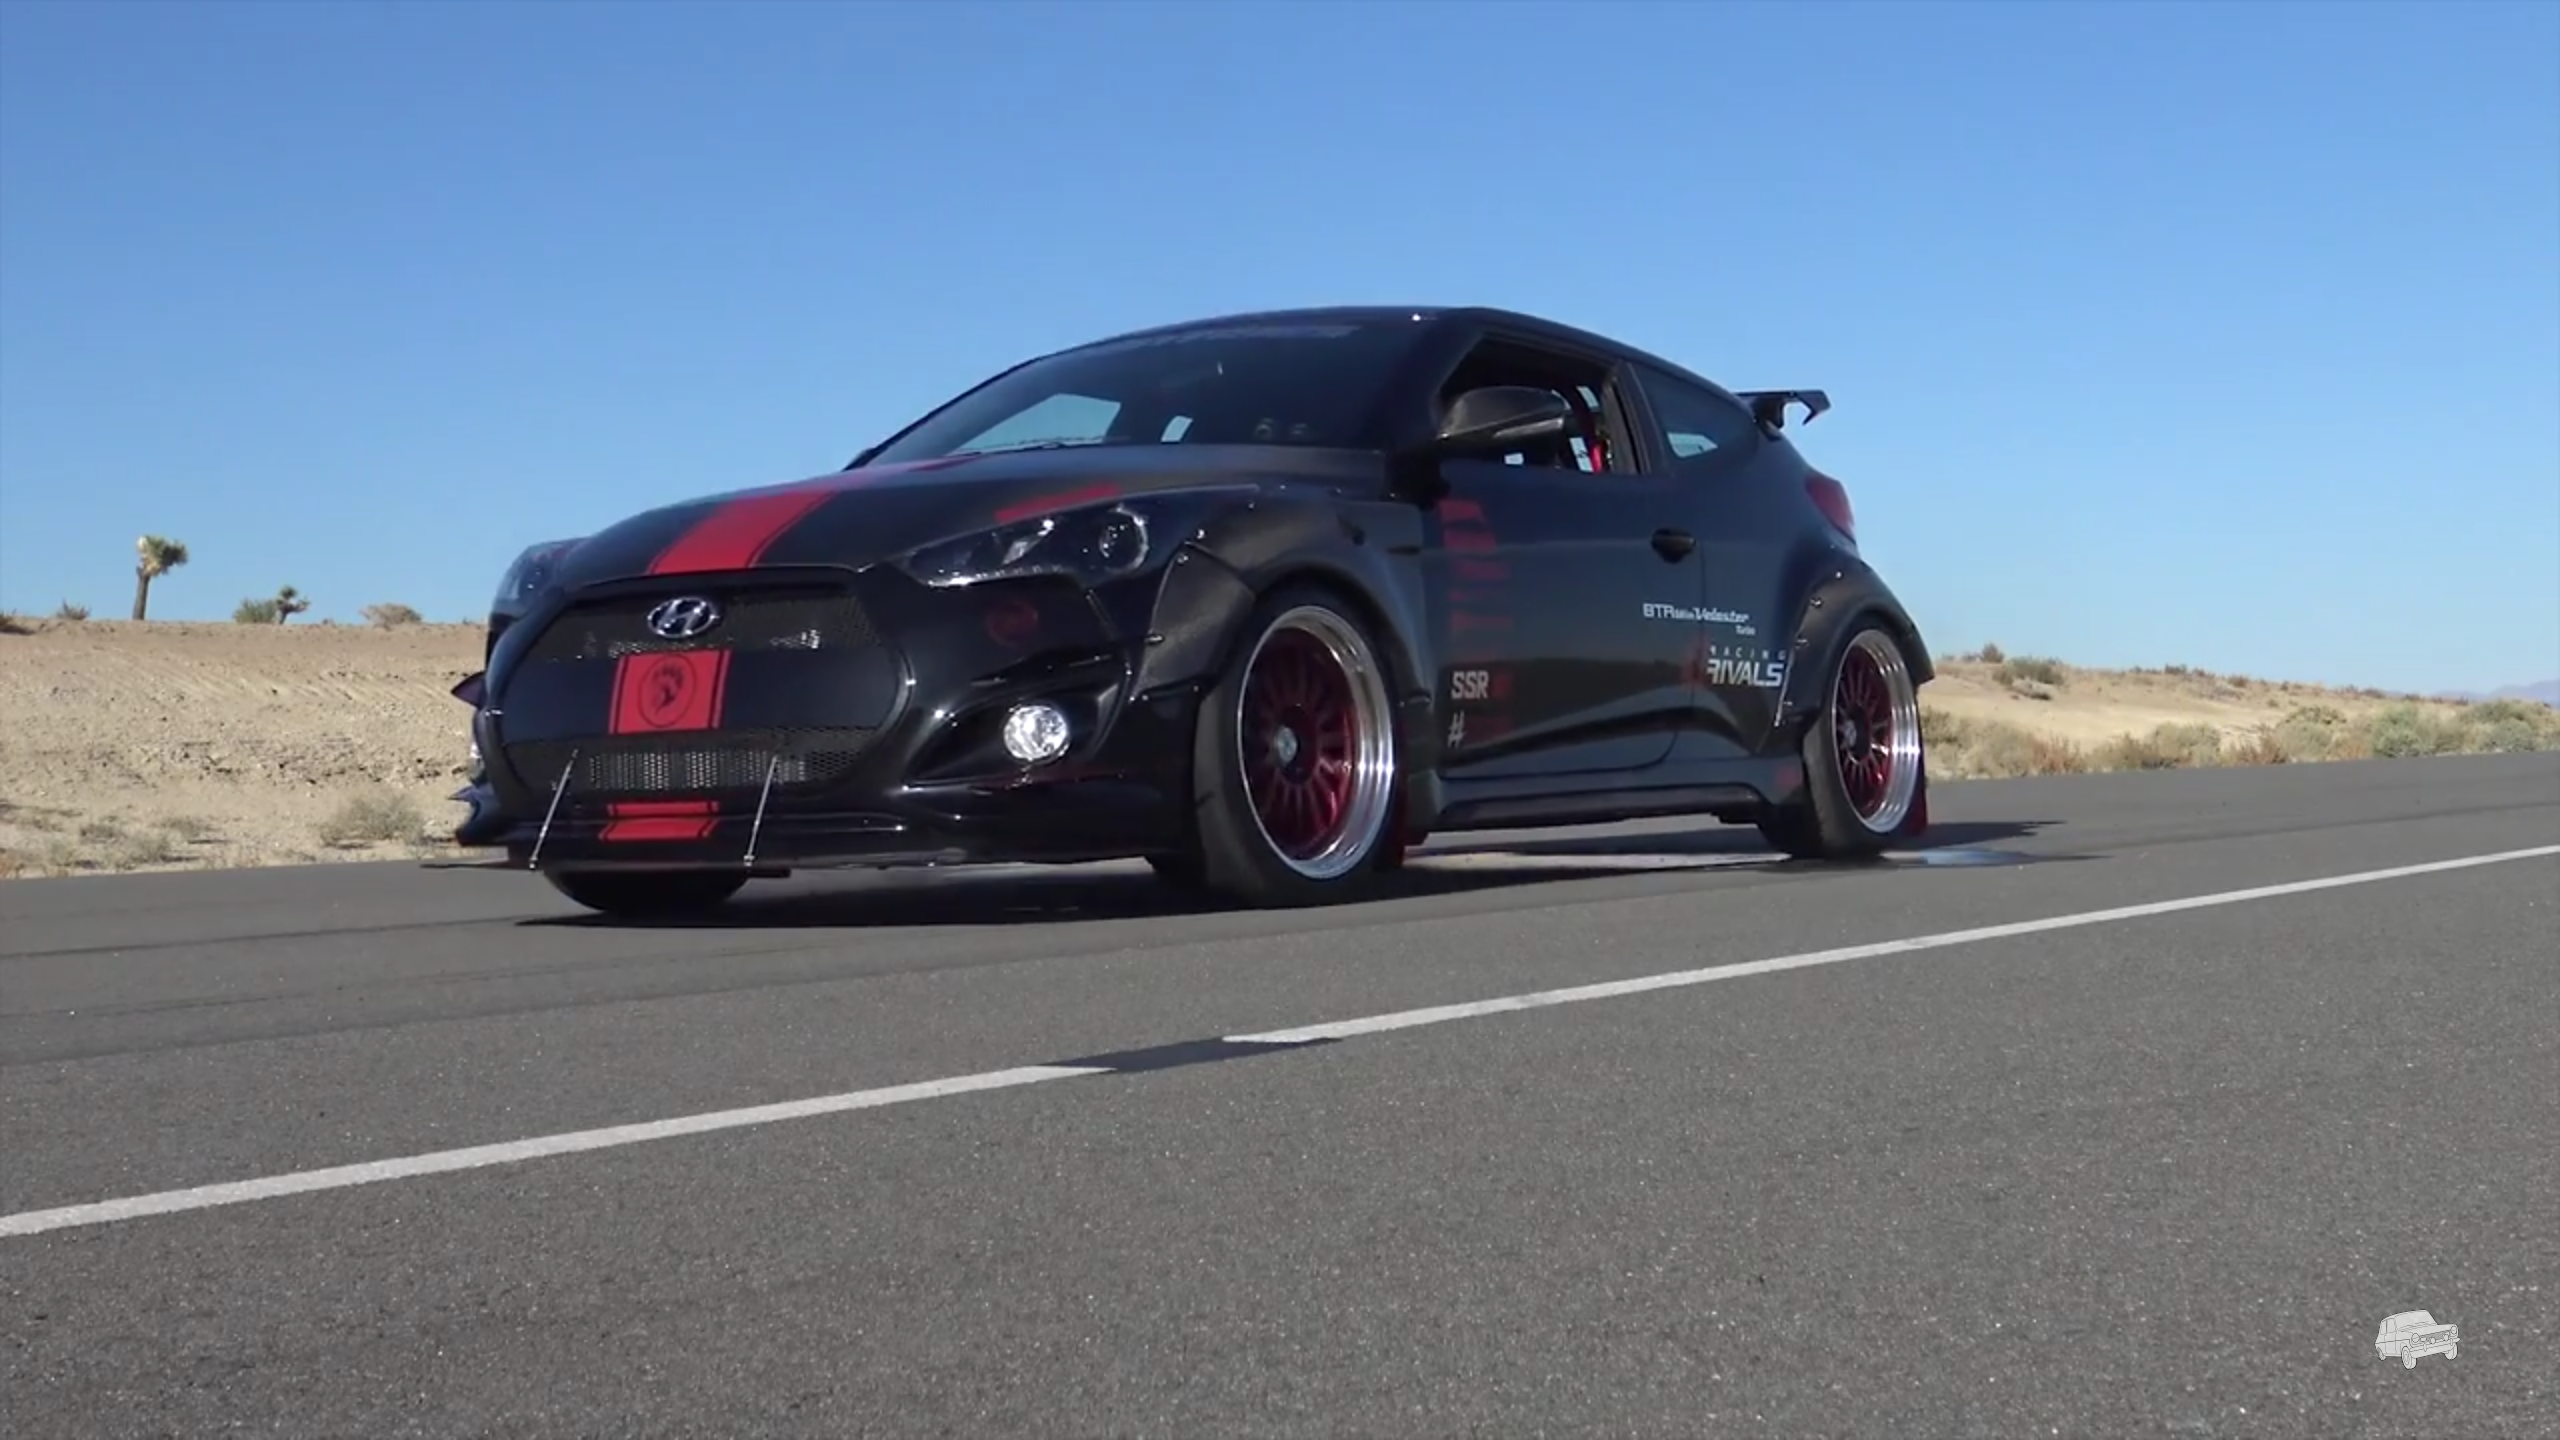 Blood Type Racing Veloster at Hyundai Proving Grounds